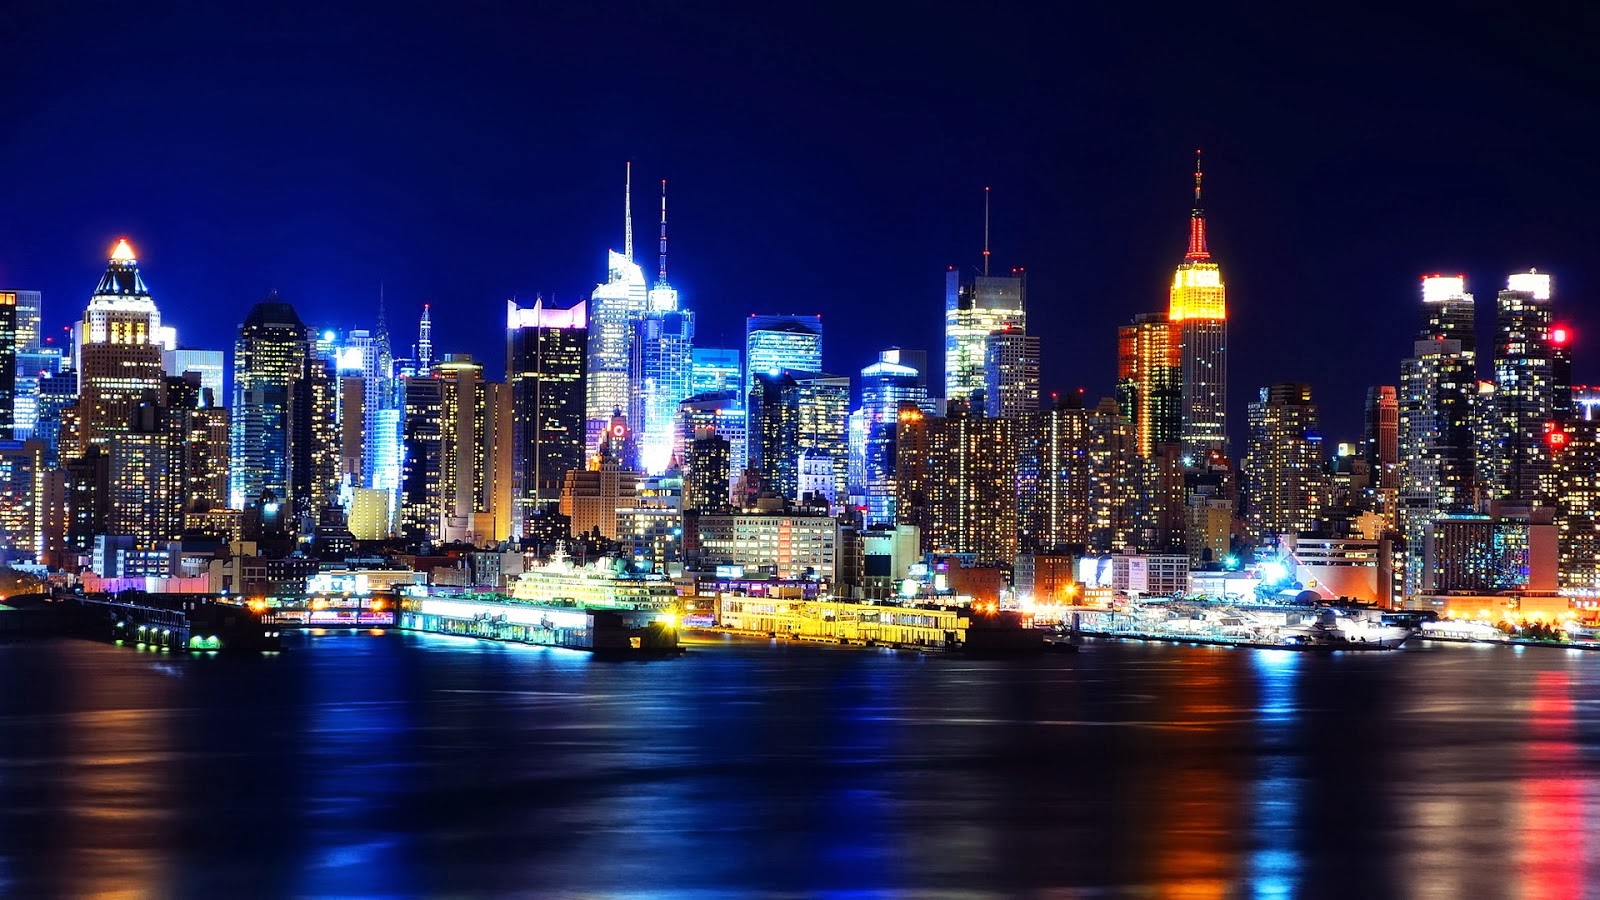 new york city hd wallpapers 1080p download new york city hd wallpapers